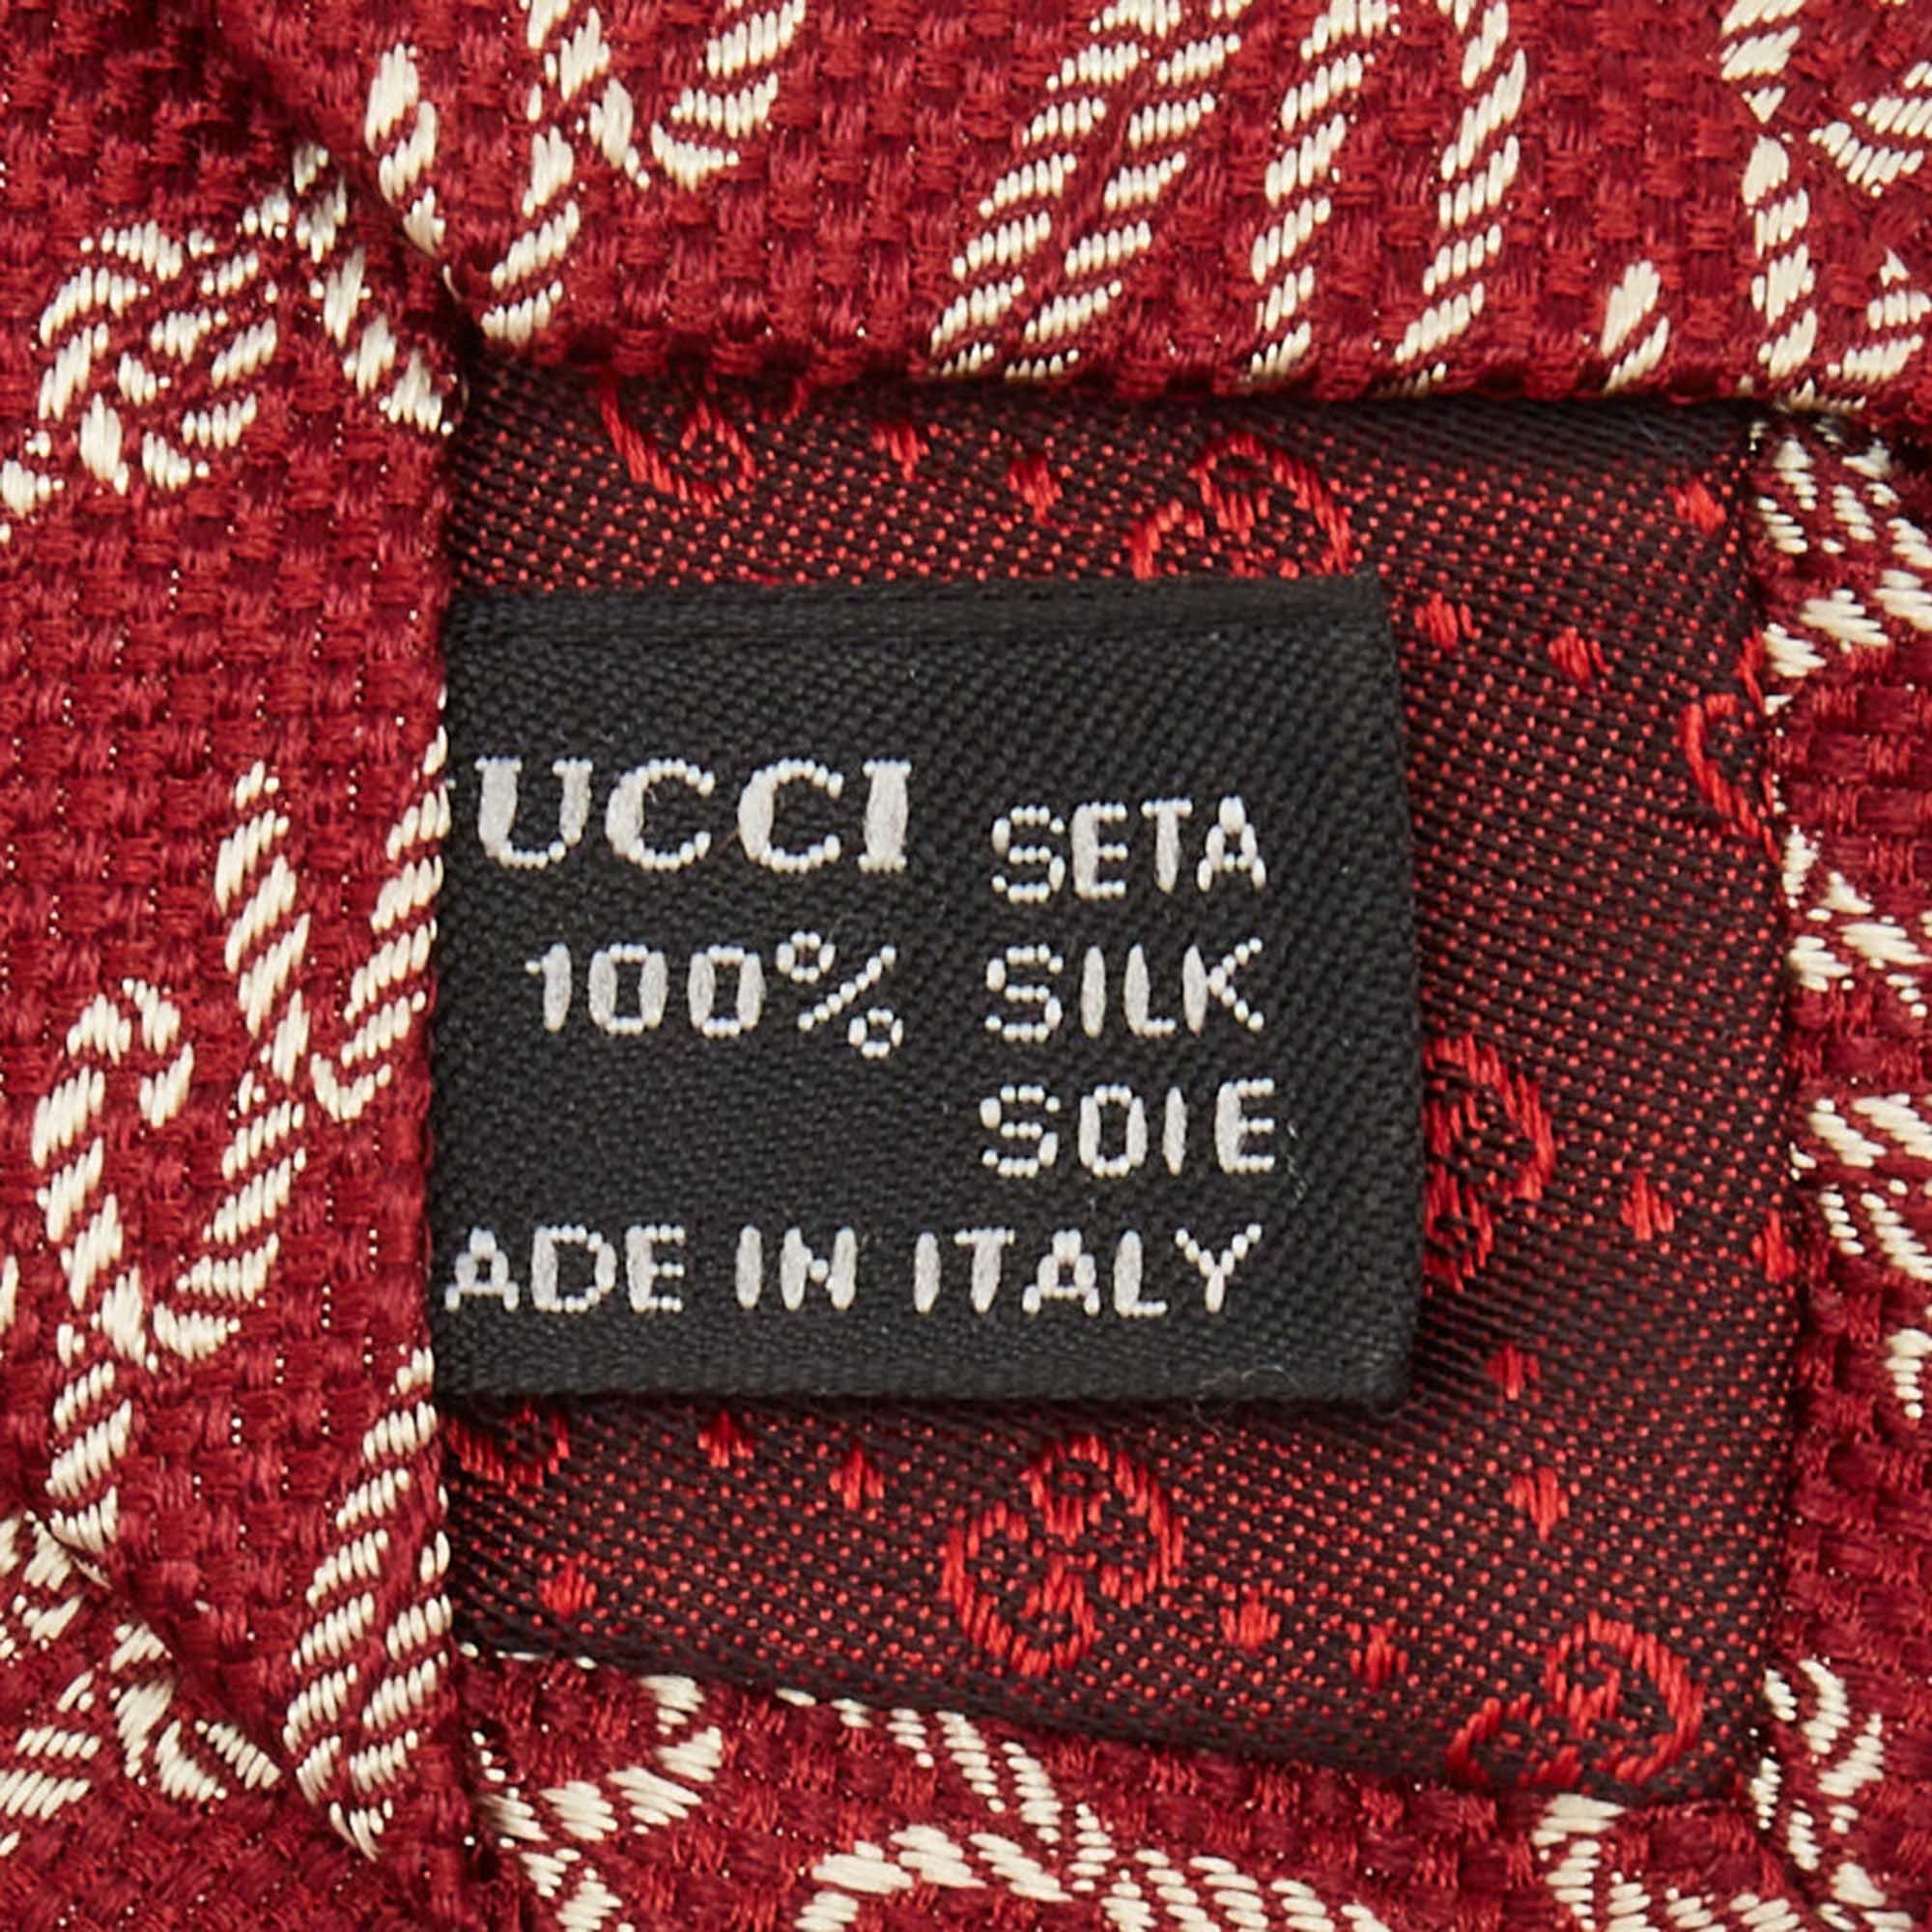 Gucci Red Logo Patterned Silk Tie